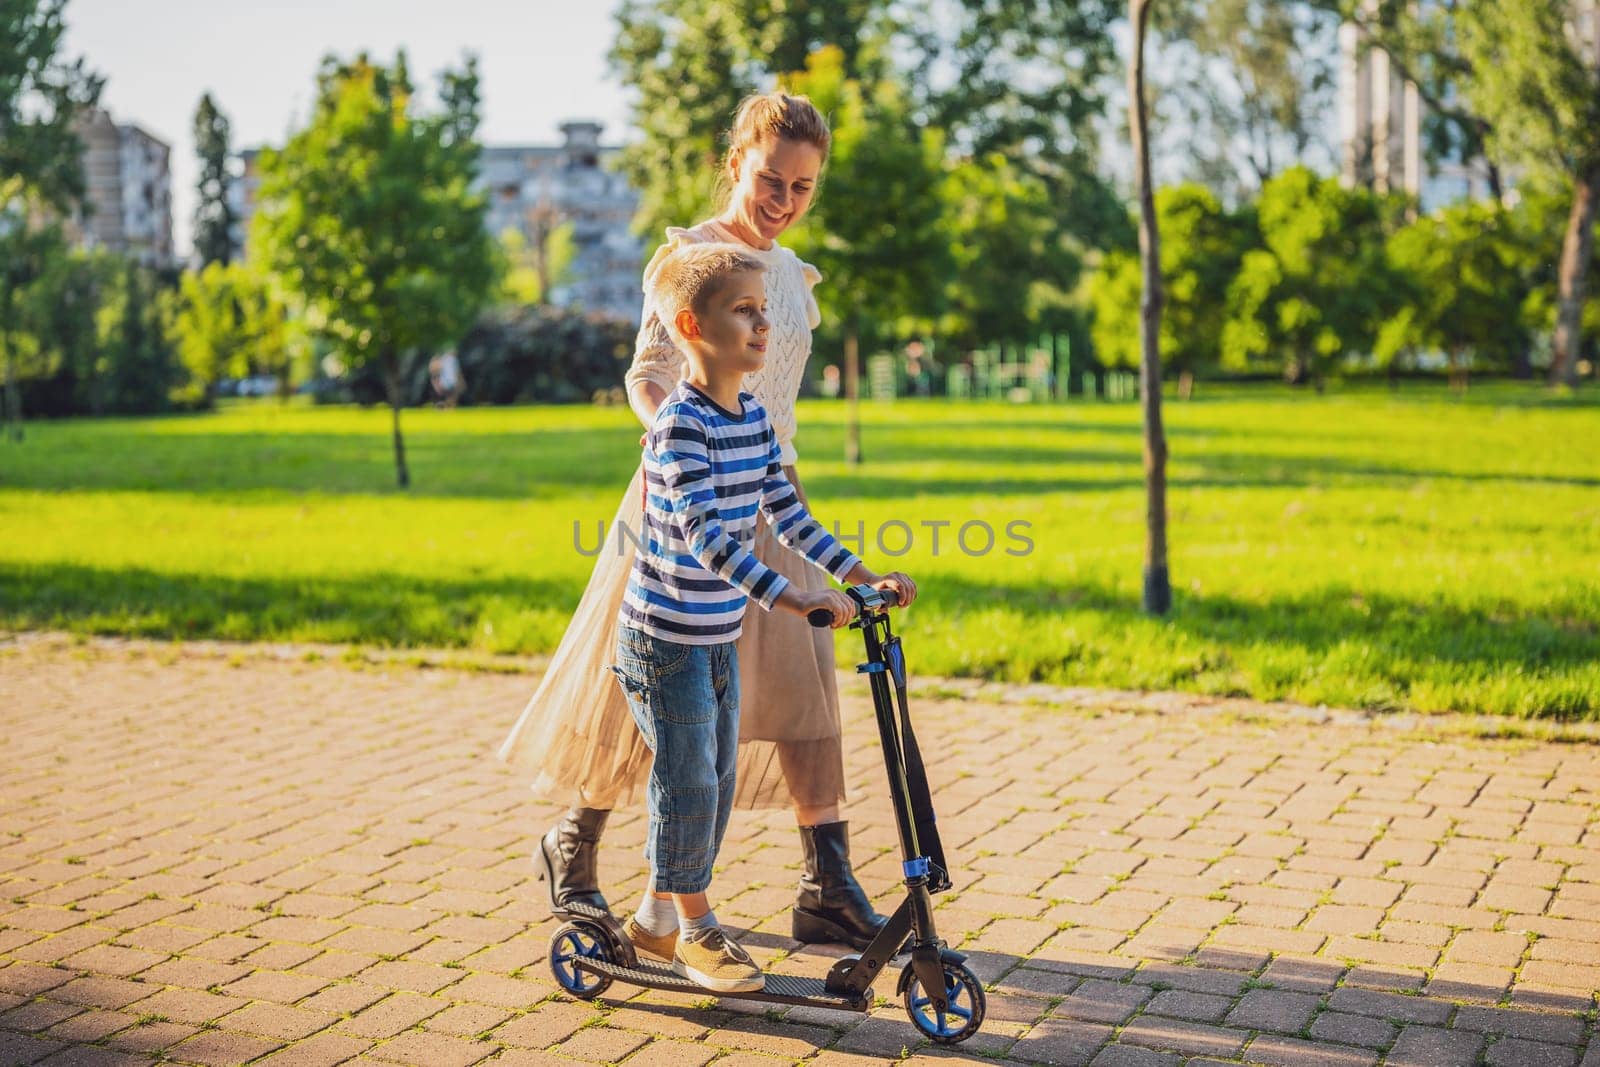 Mother having fun with her son in park on sunny day. Boy is ridding skateboard and his mother is pushing him.